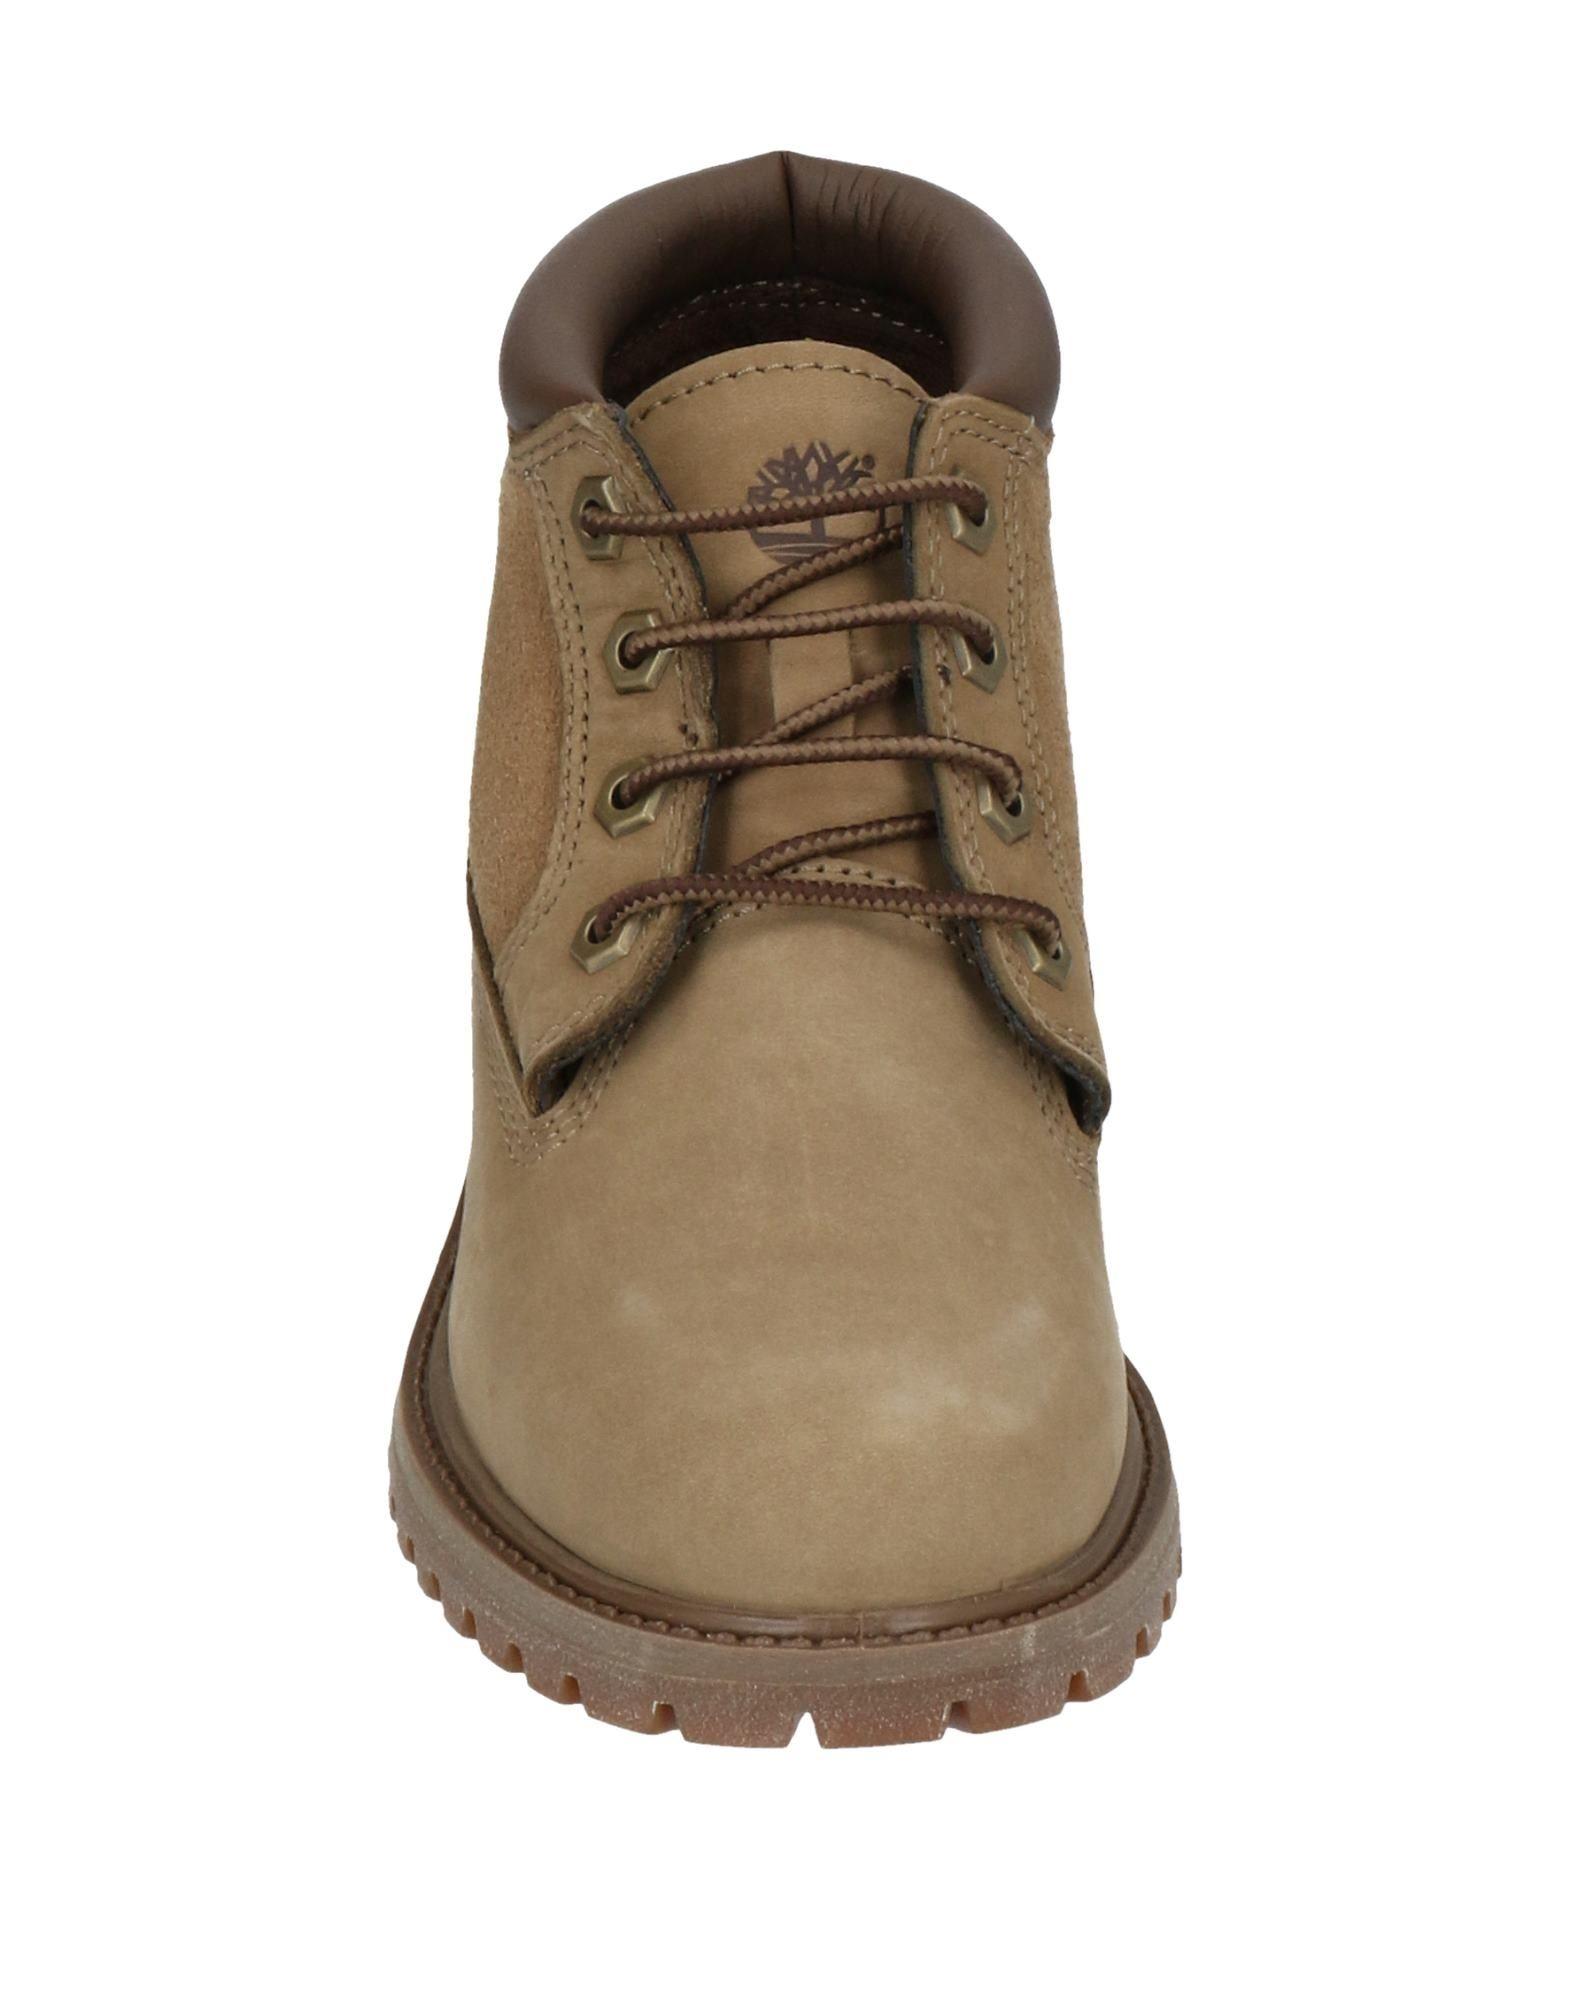 Timberland Leather Ankle Boots in Khaki (Natural) - Lyst